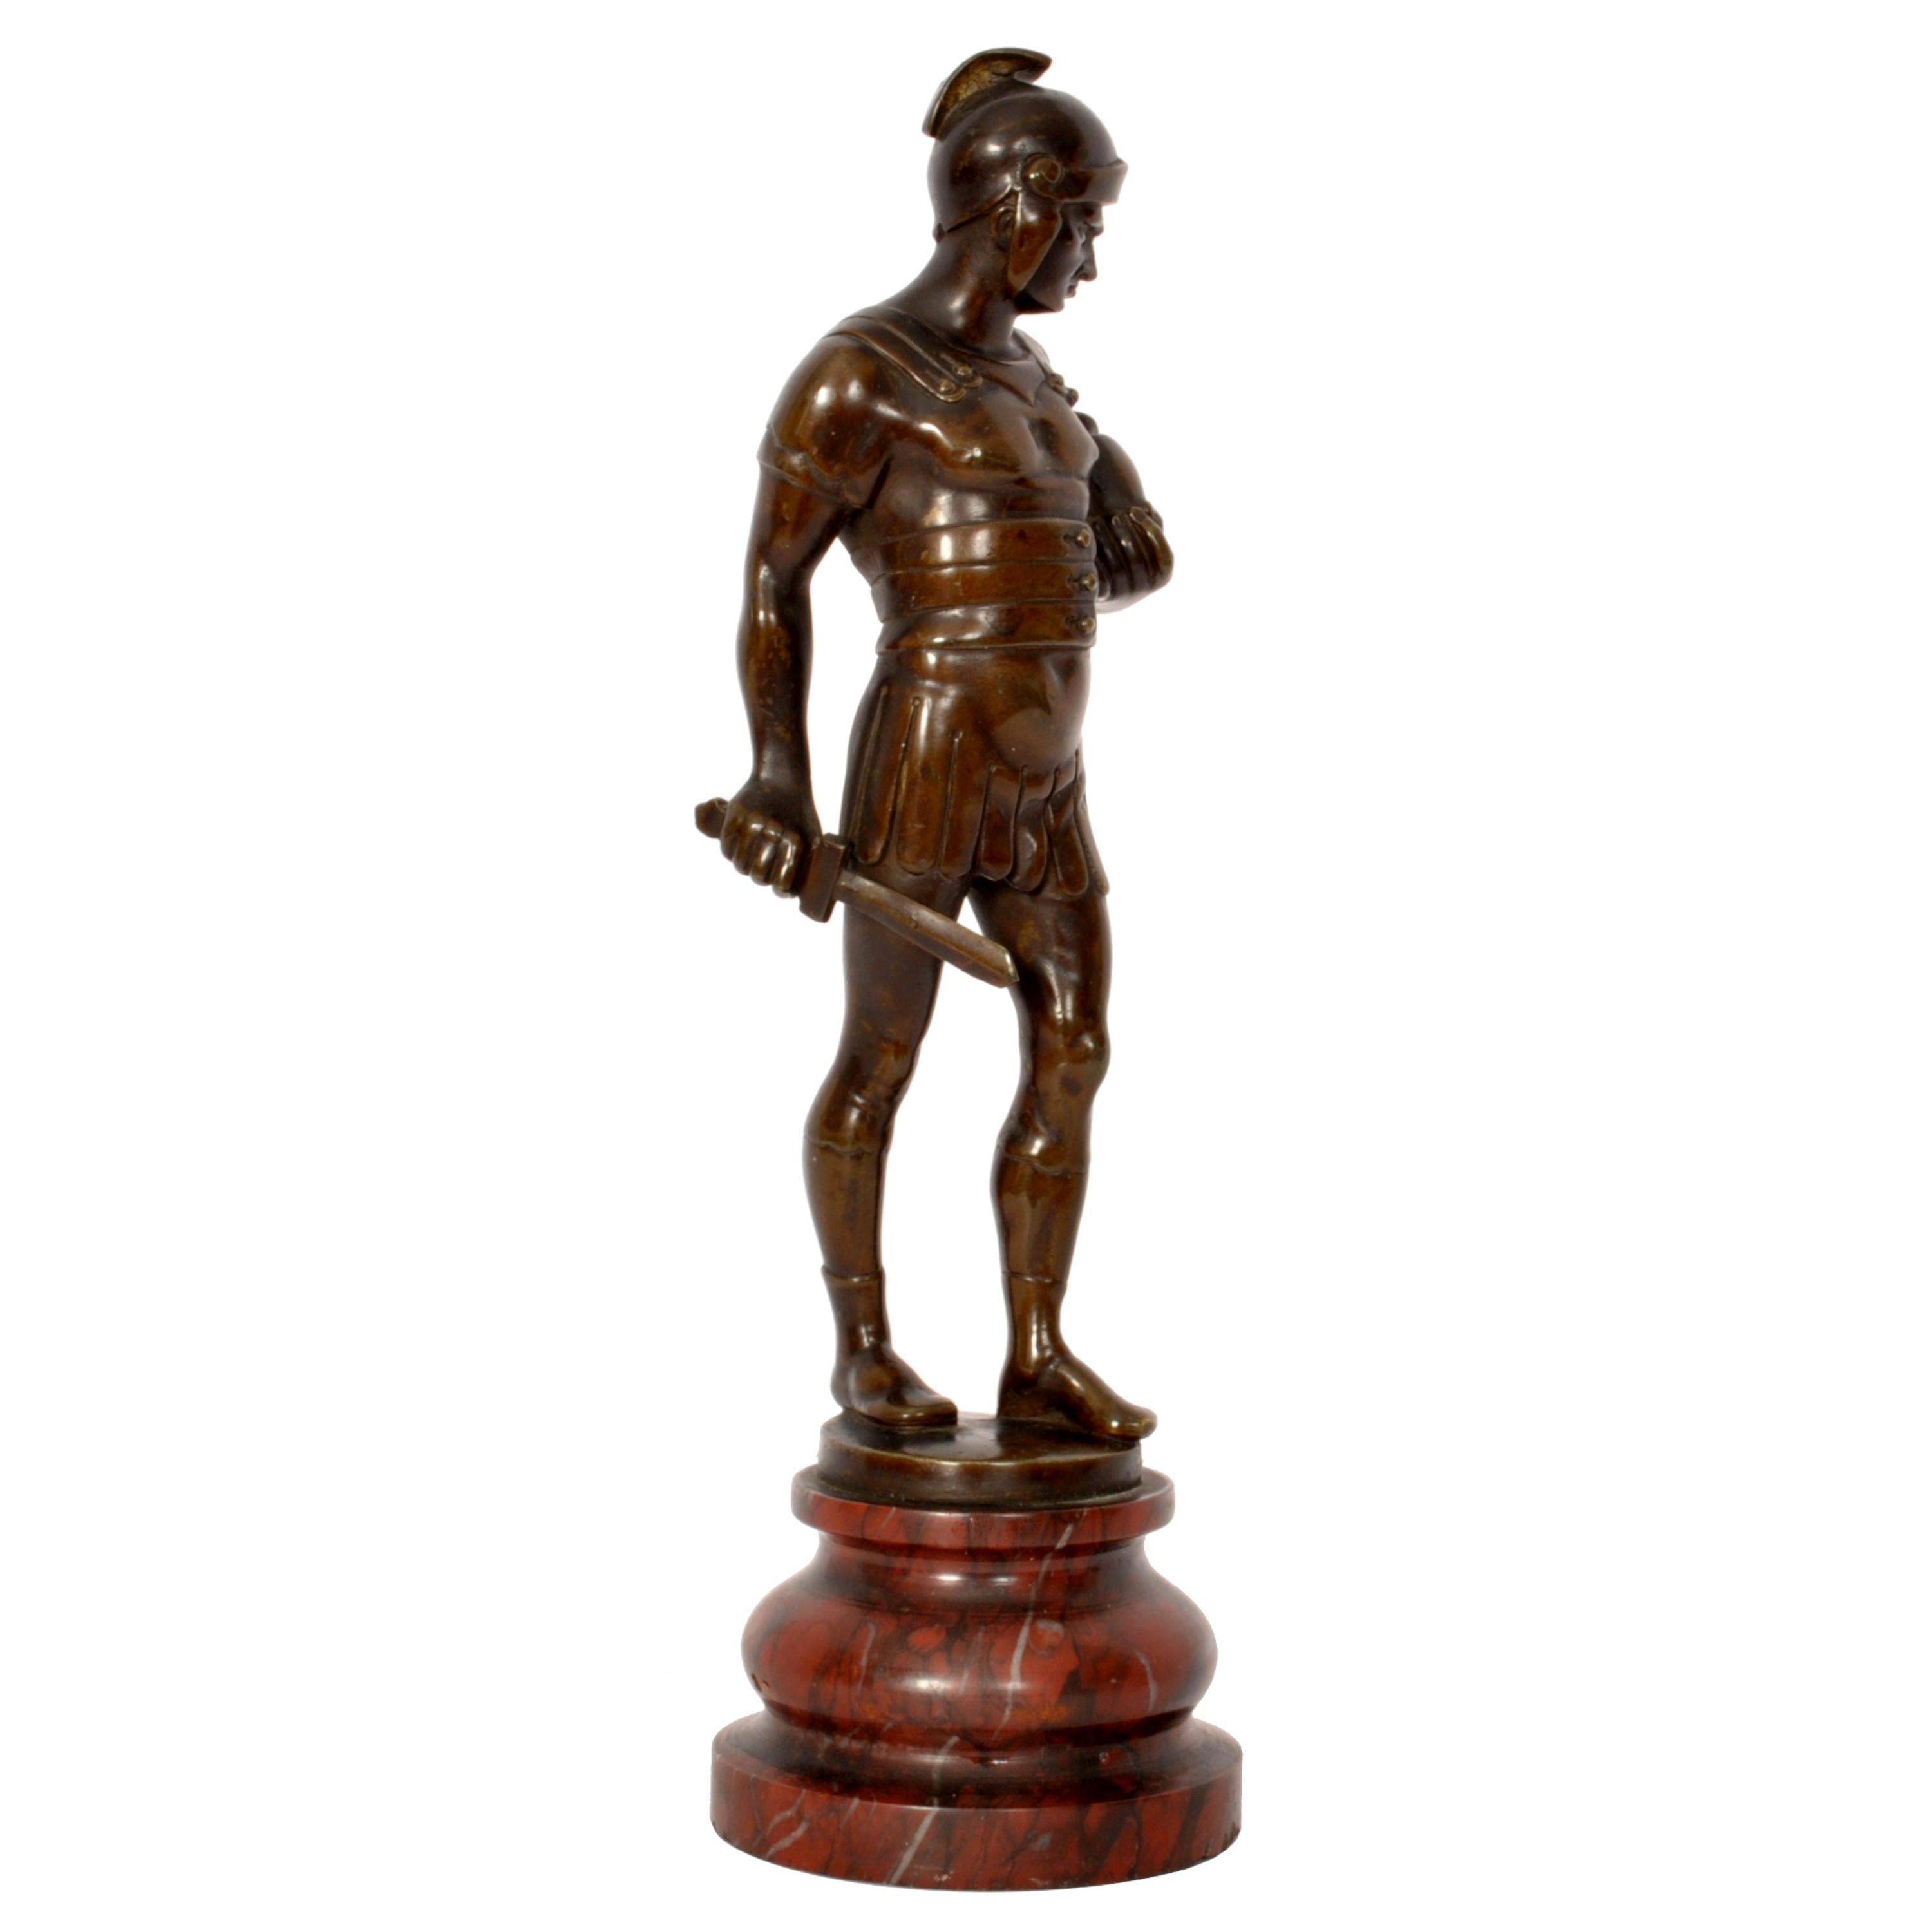 A fine quality antique Grand Tour bronze statuette of a centurion/gladiator, Italy, circa 1820.
This very handsome antique bronze was cast by the lost wax (cire purdue) method and portrays a centurion/gladiator dressed in armour, victorious in